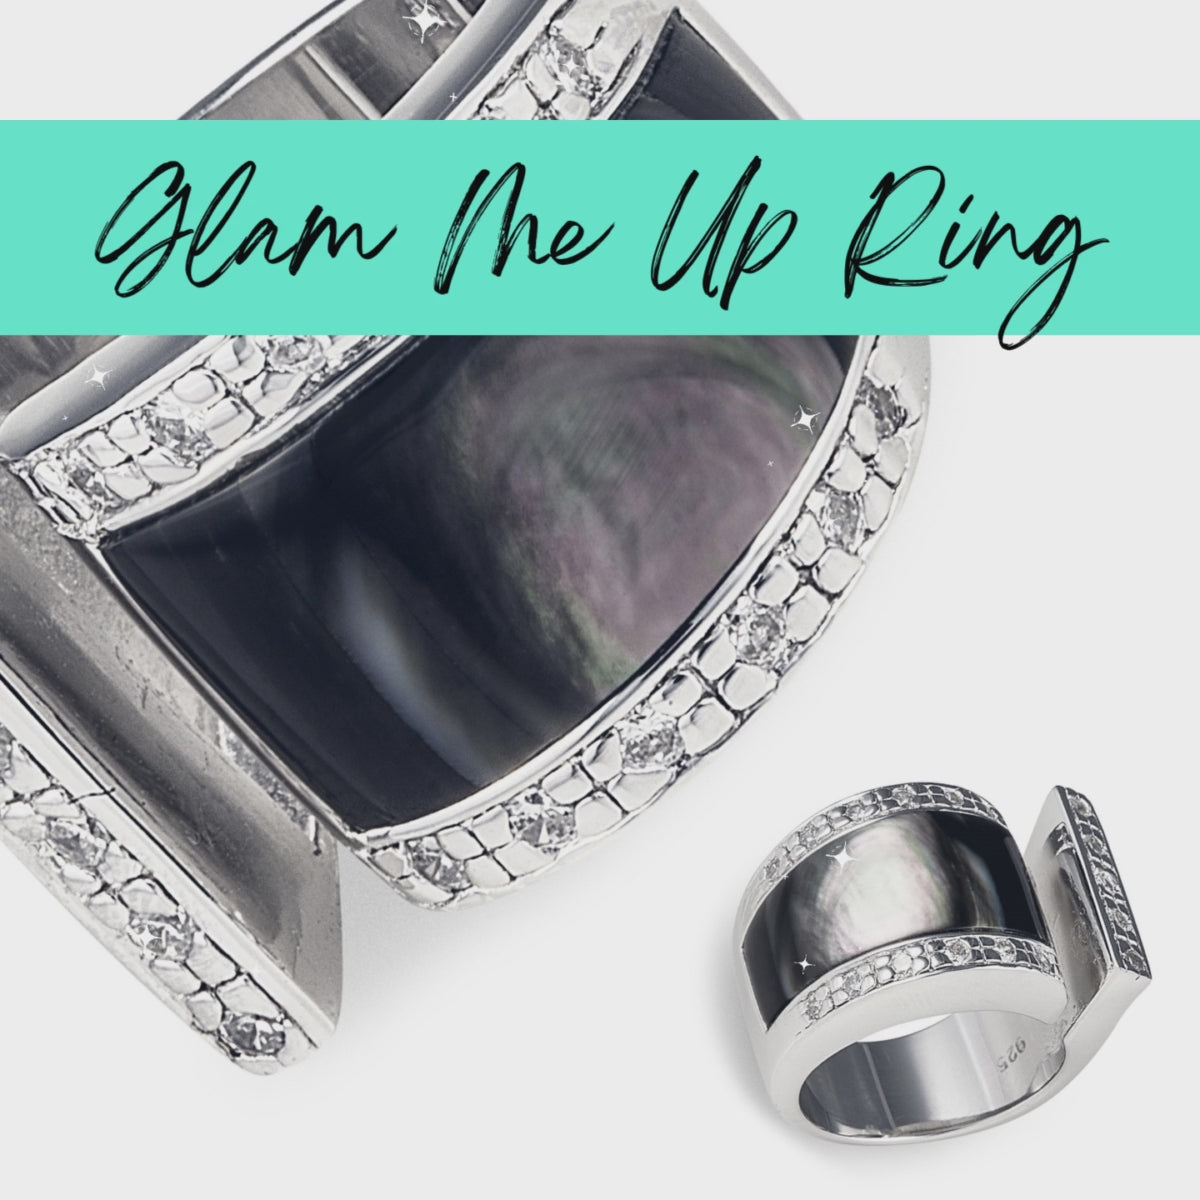 Glam Me Up Ring in 925 Sterling Silver with Mother of Pearl and Cubic Zirconia Stones. Open ring style with asymmetric design. Worldwide shipping + FREE shipping Australia wide.